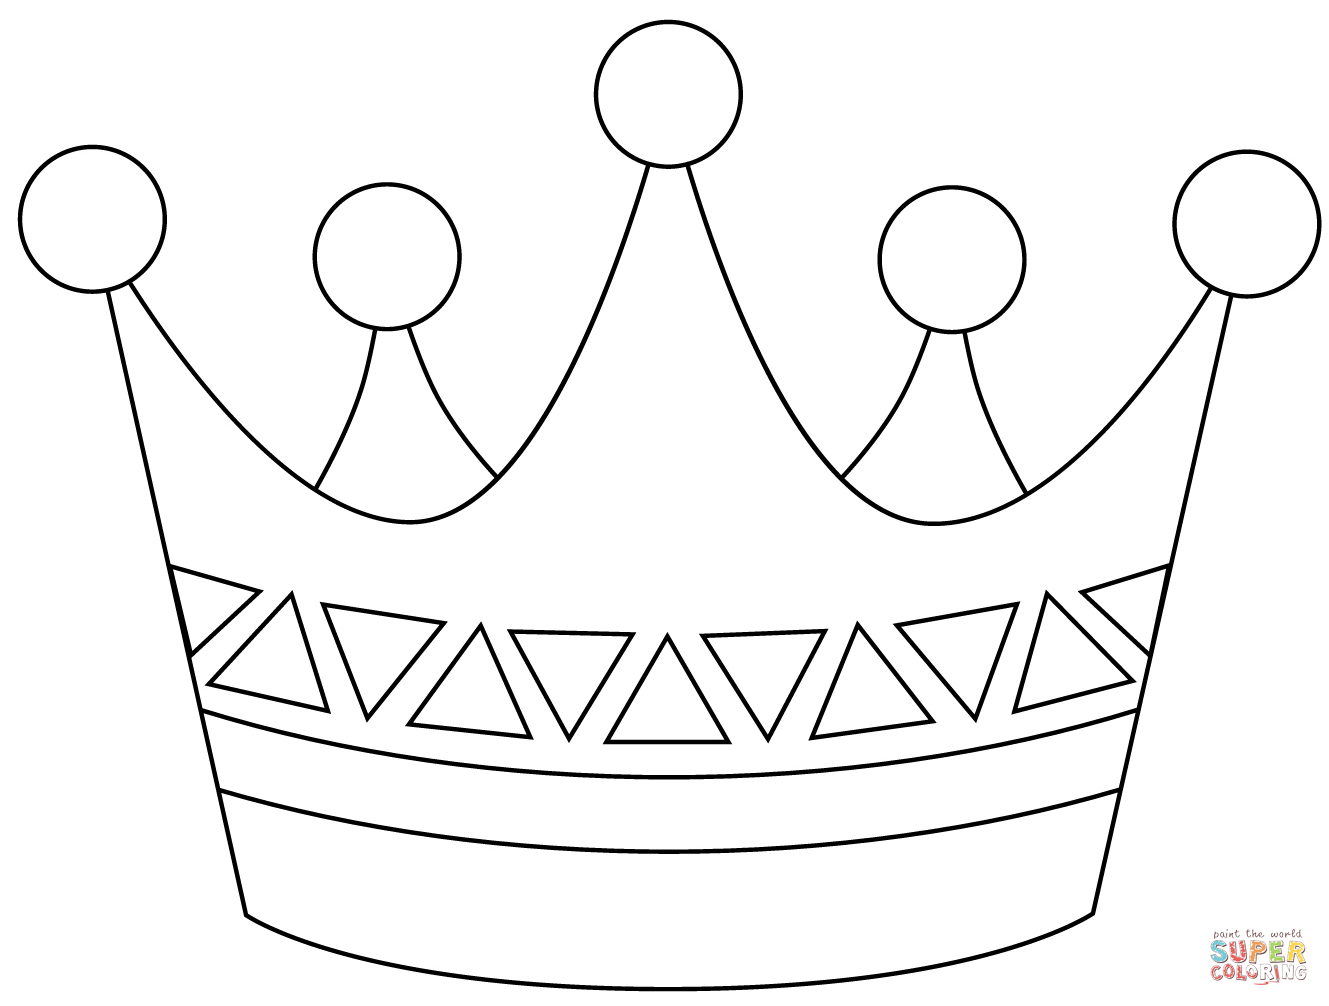 Queen crown coloring page free printable coloring pages